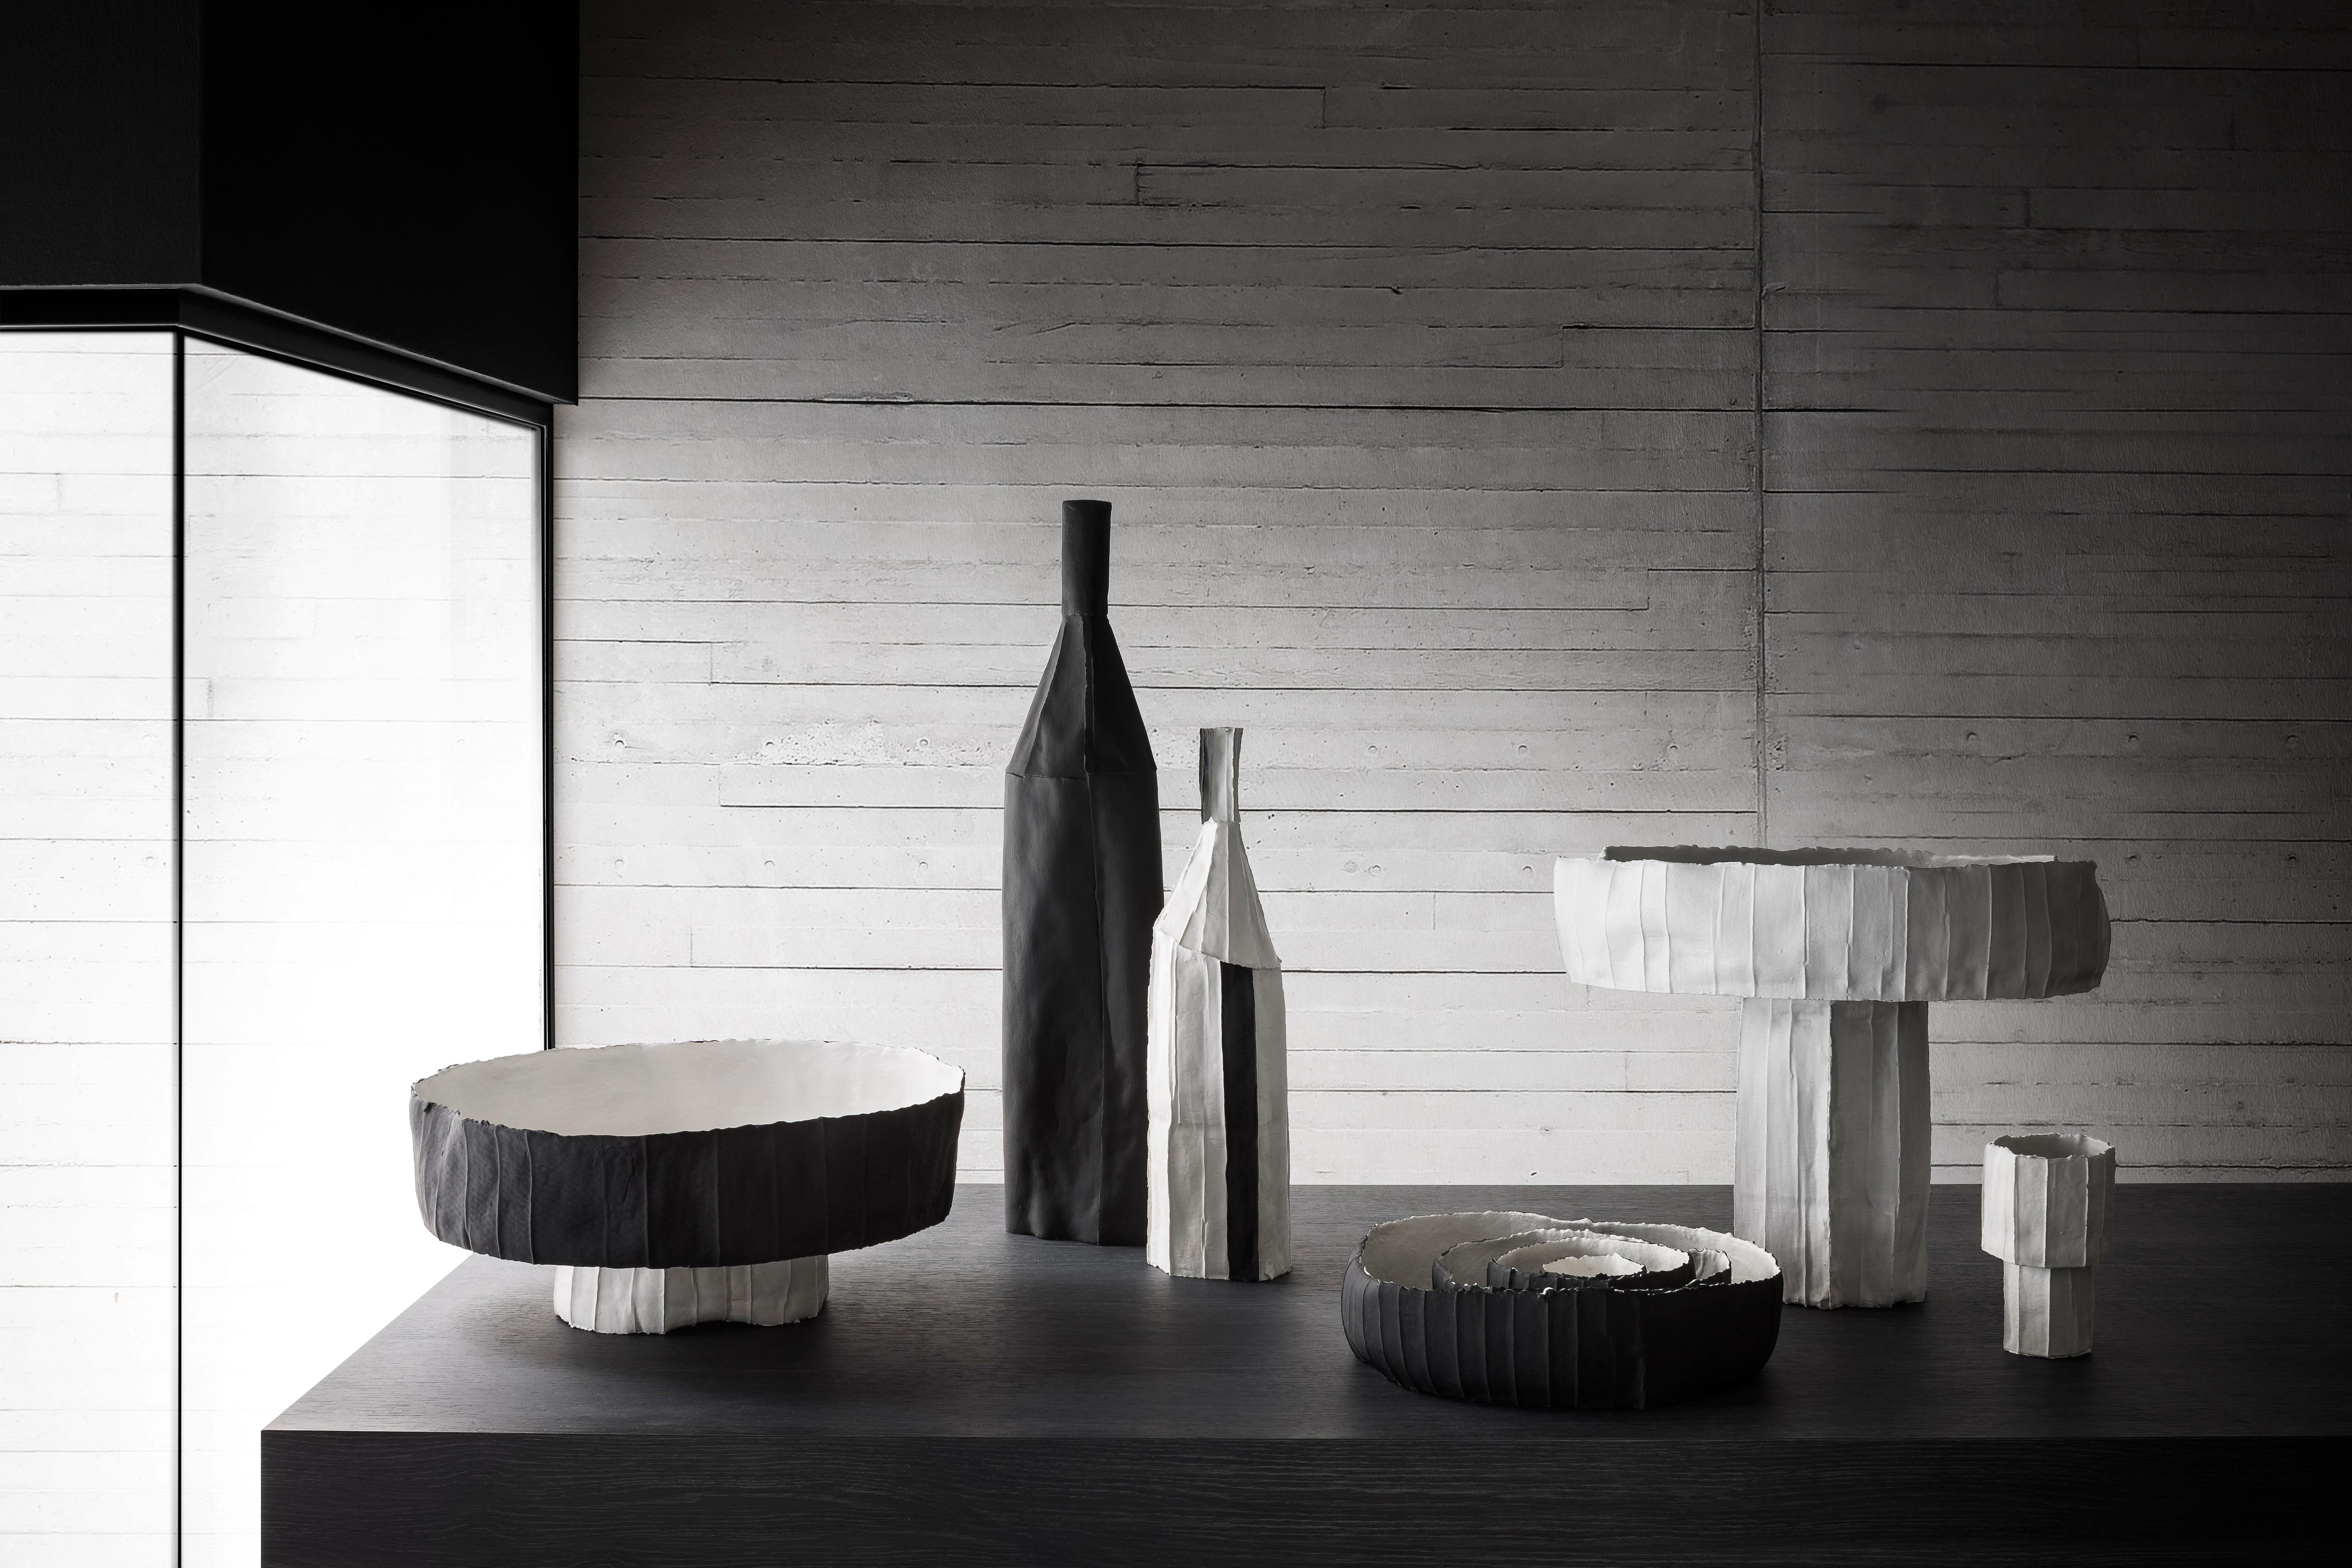 A Classic bottle shape in a Classic black-and-white color block combination takes on a completely new look in this striking piece. Its unique texture comes from the paper clay, a material obtained by adding paper pulp and natural fibers to a clay